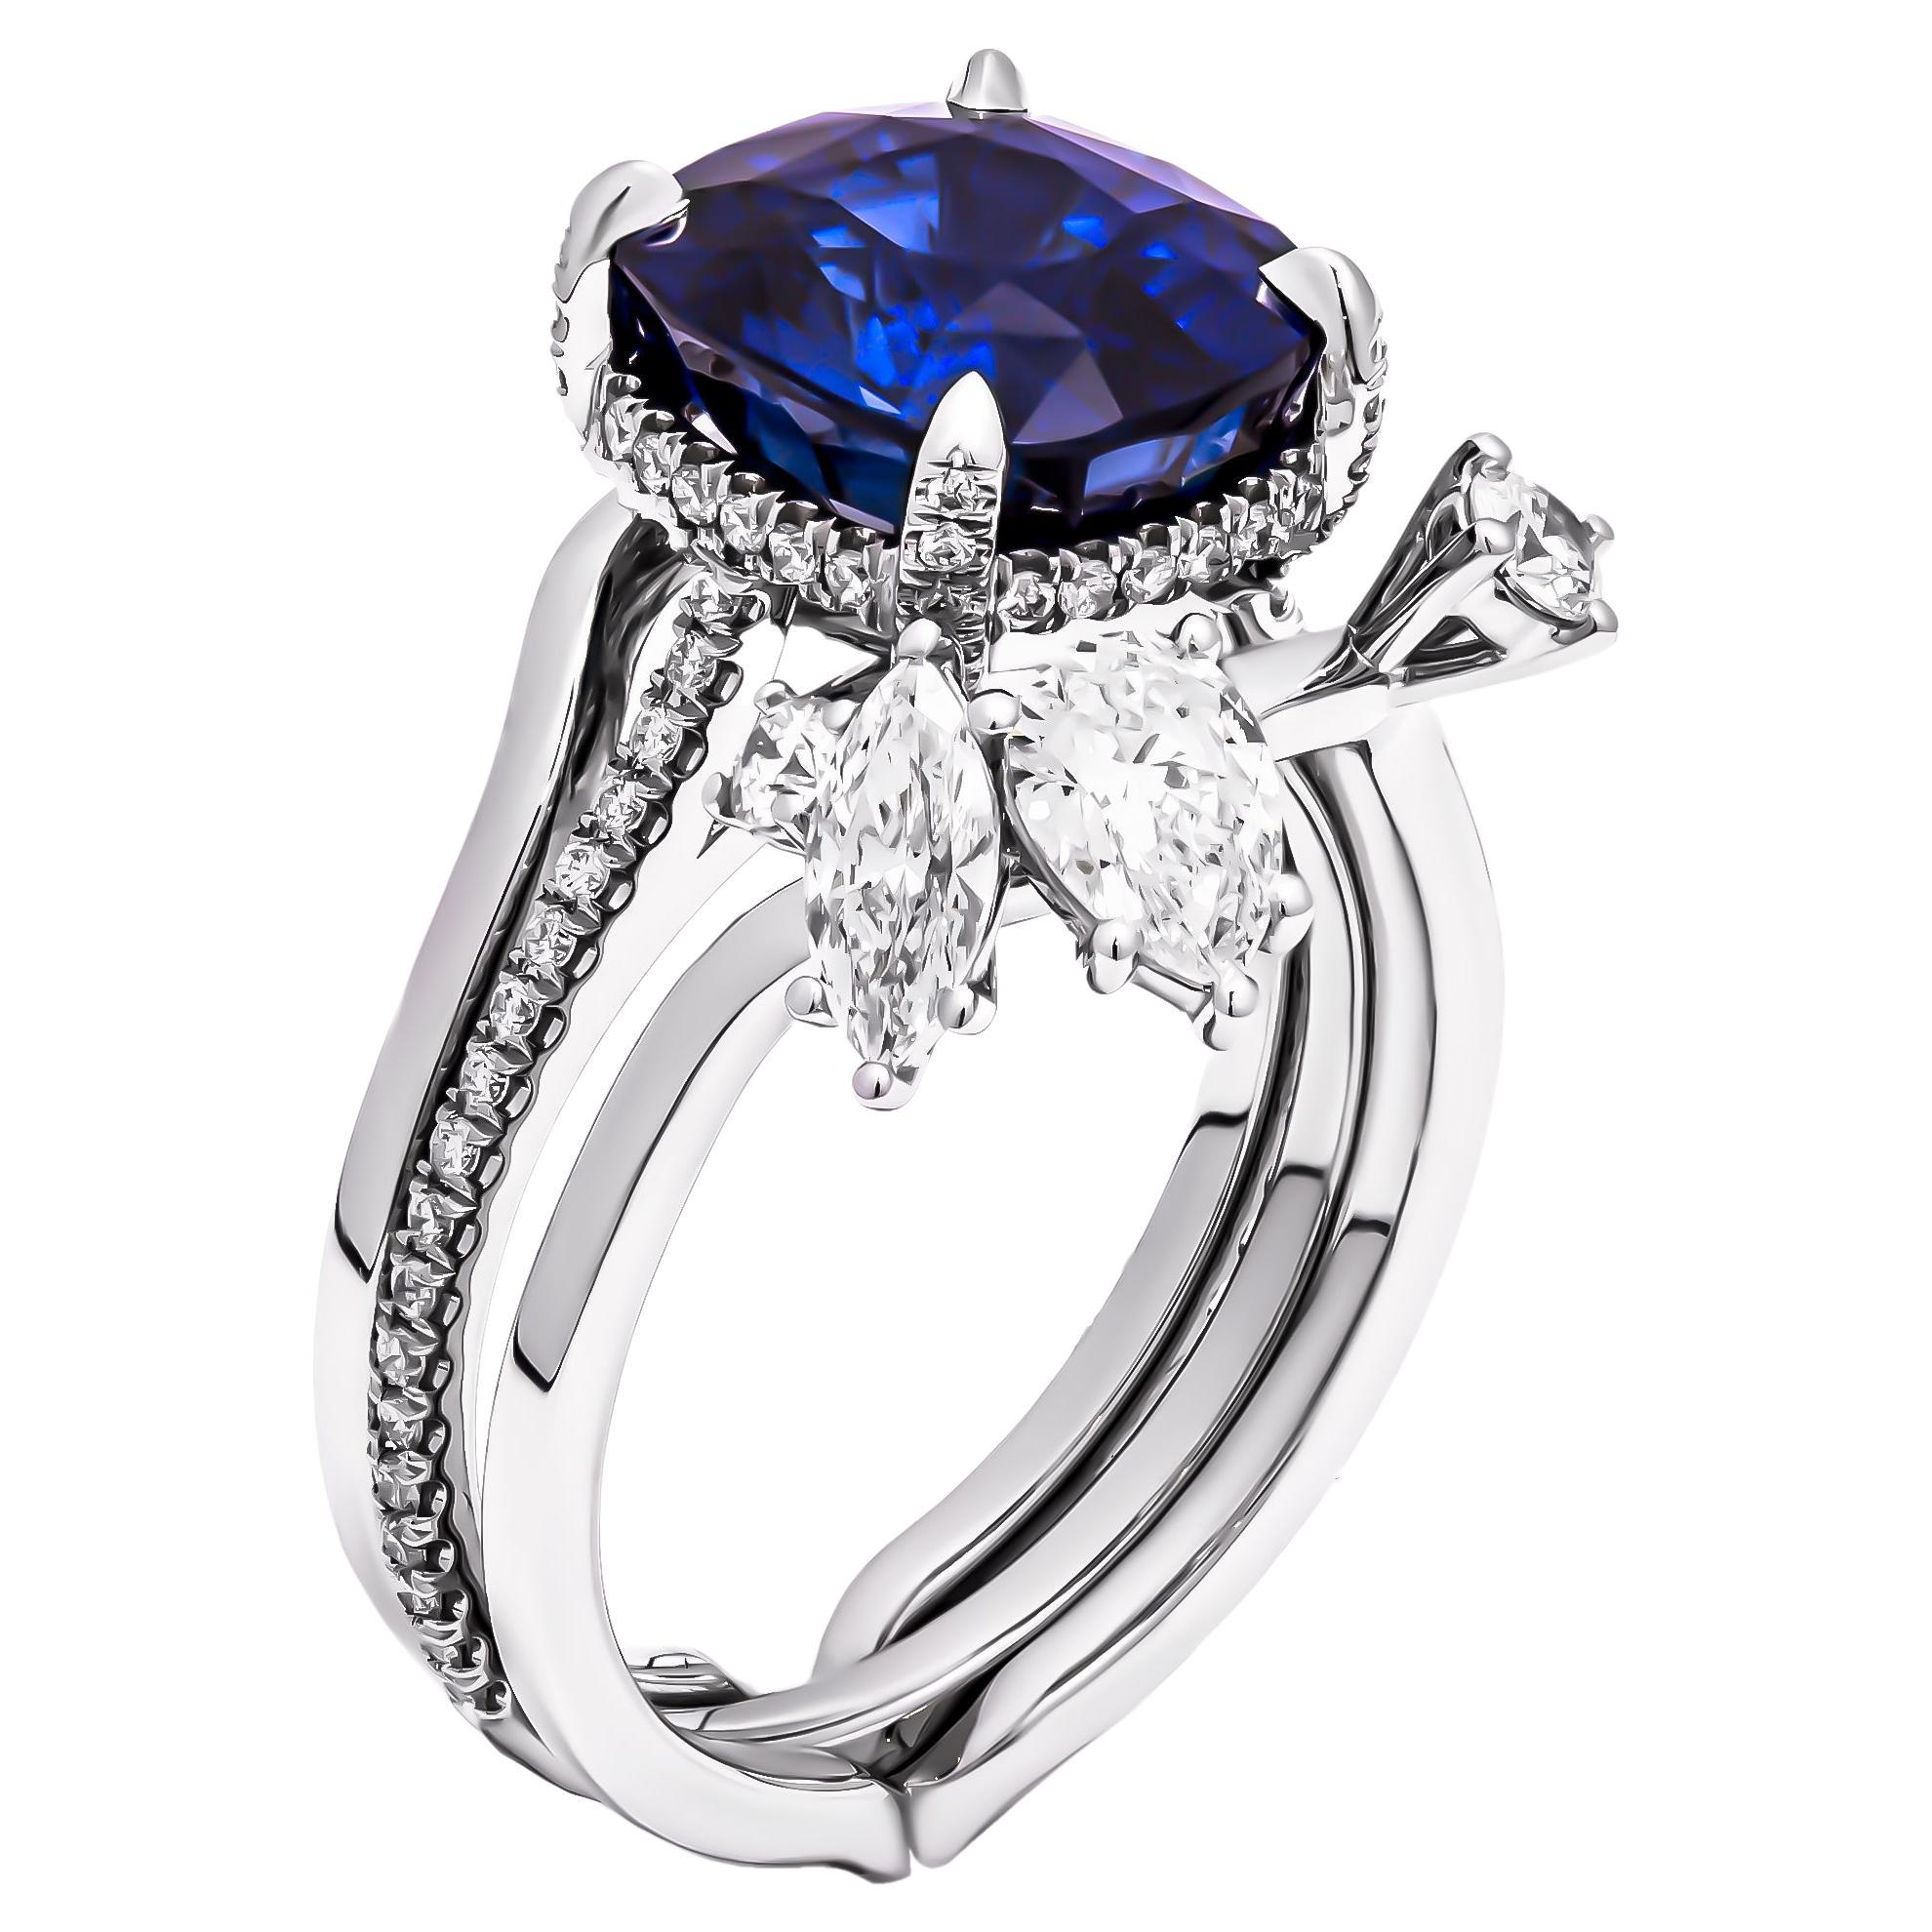 Elevate your jewelry collection with an extraordinary Platinum Ring featuring a mesmerizing 5.08-carat cushion-cut Blue Sapphire as its centerpiece. This exceptional ring exudes opulence and sophistication, making it a timeless symbol of elegance